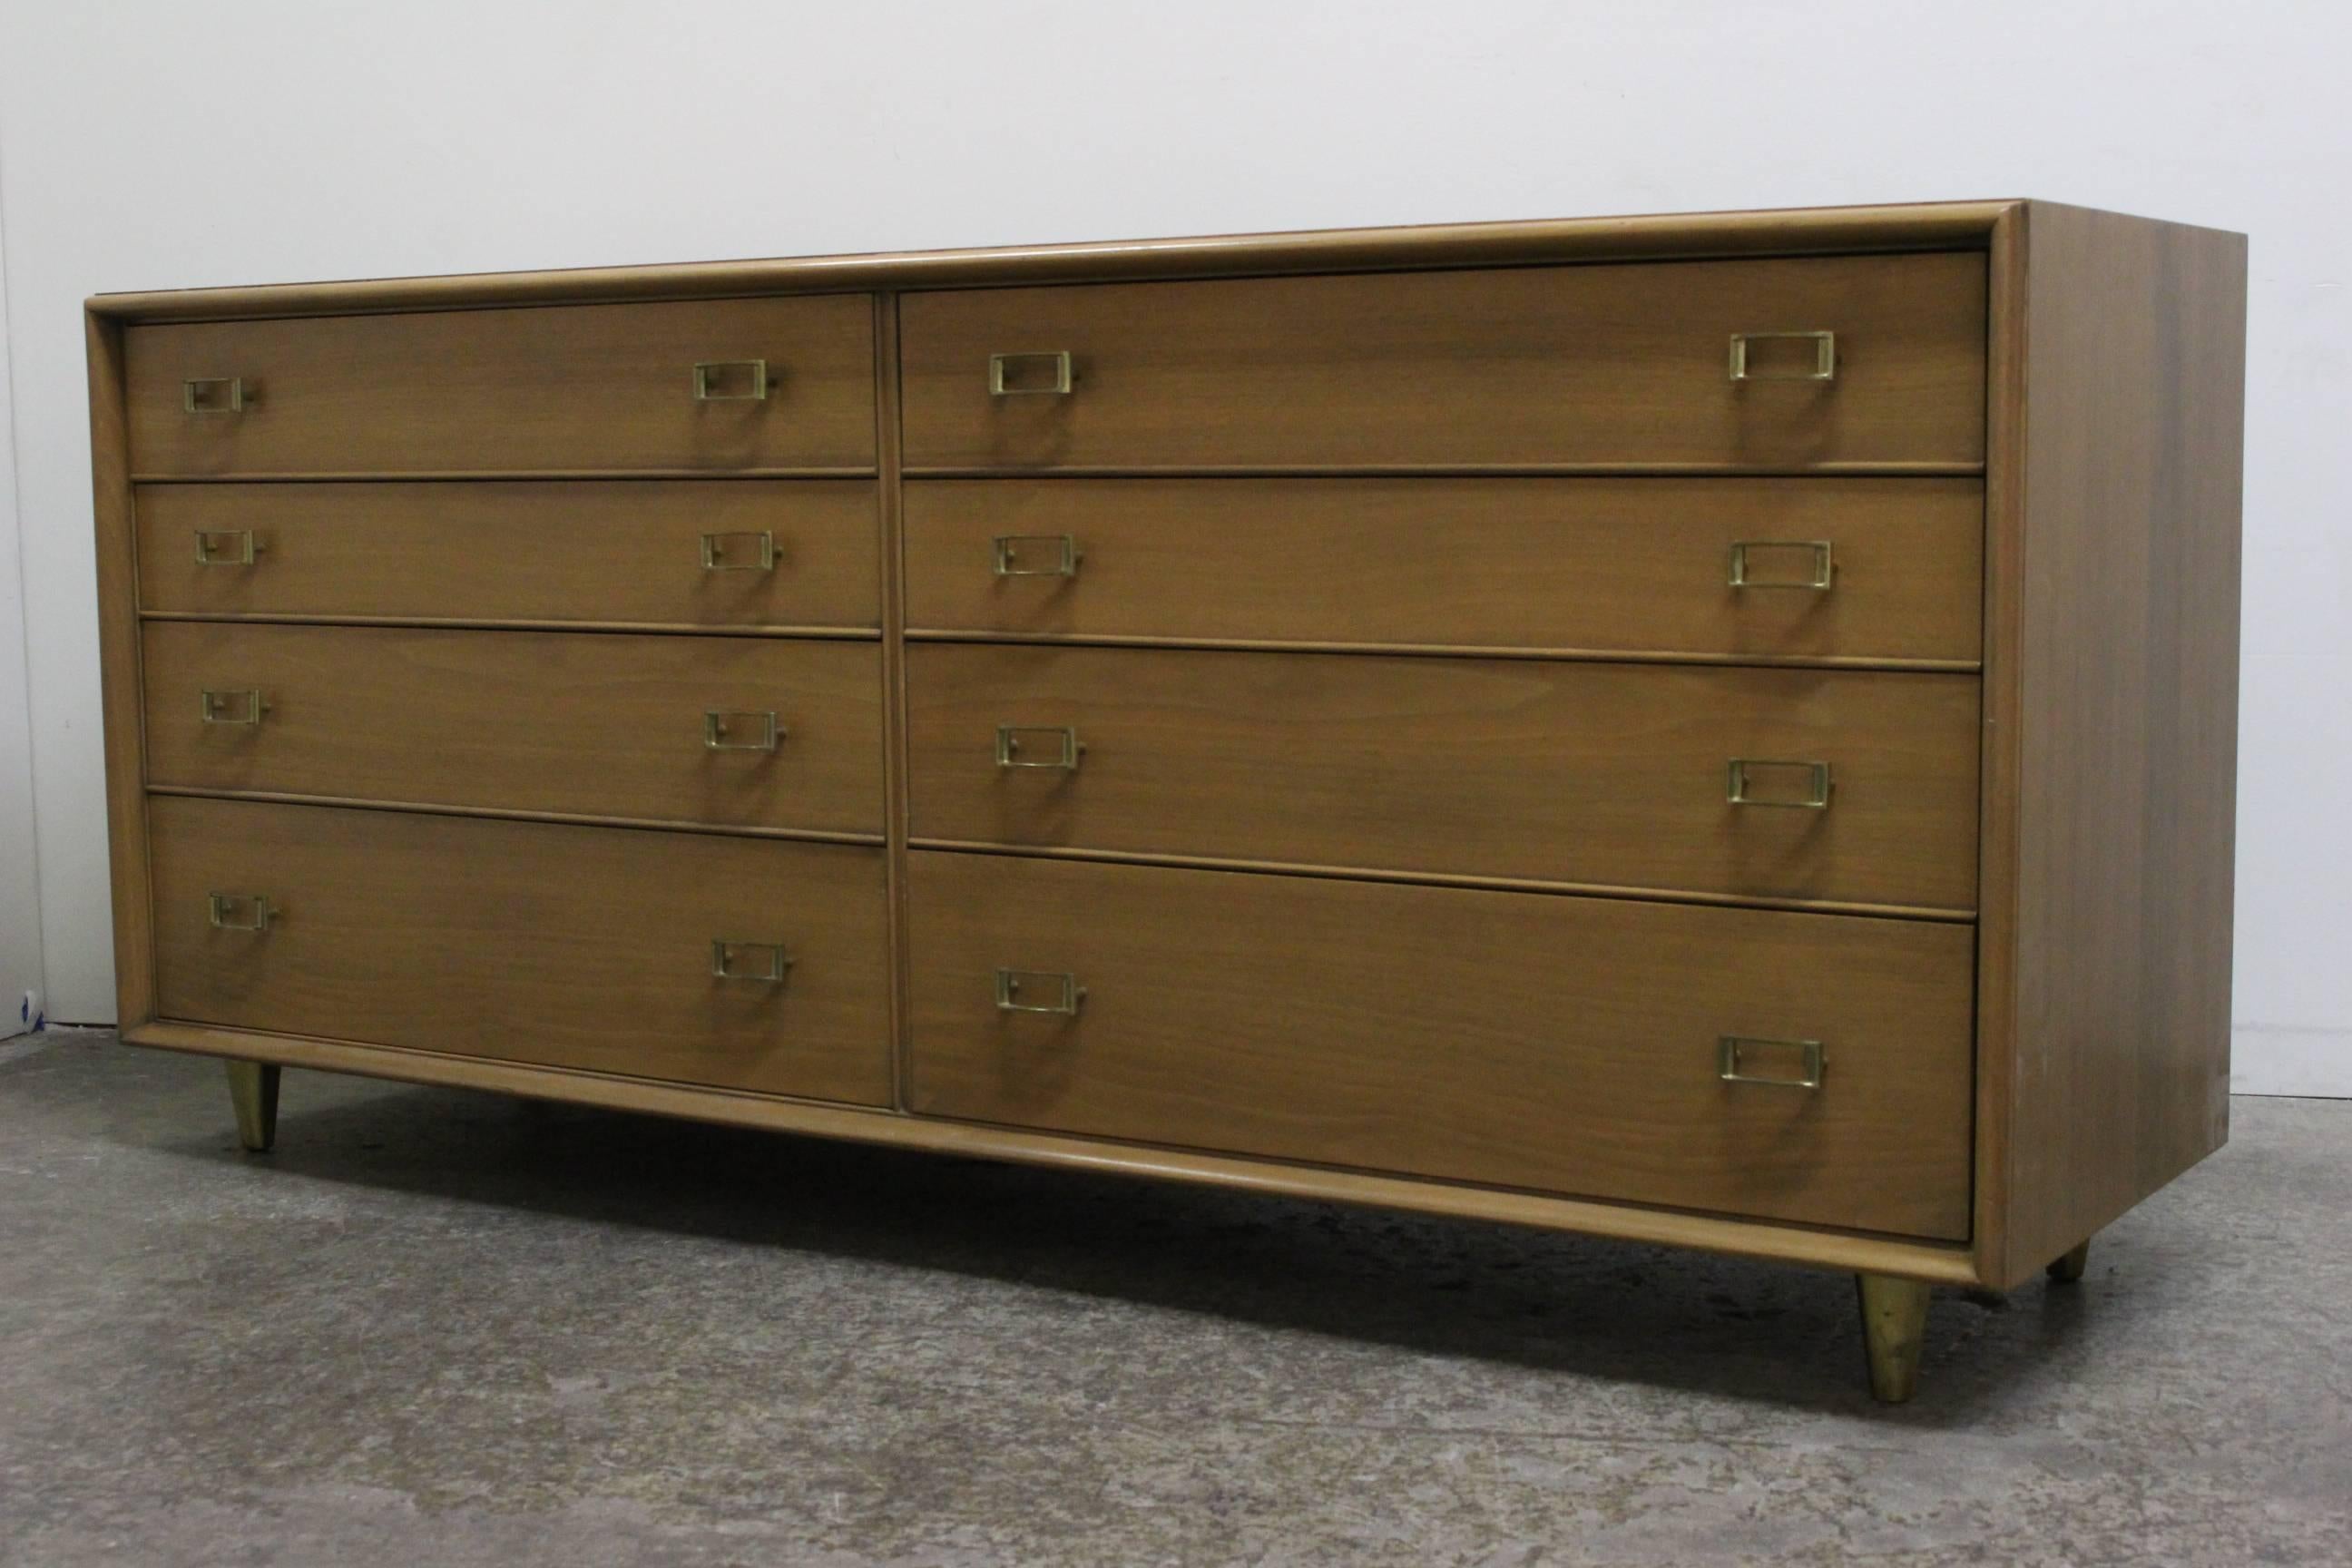 Eight-drawer dresser by Paul Frankl for Johnson Furniture. 

Dimensions: 72